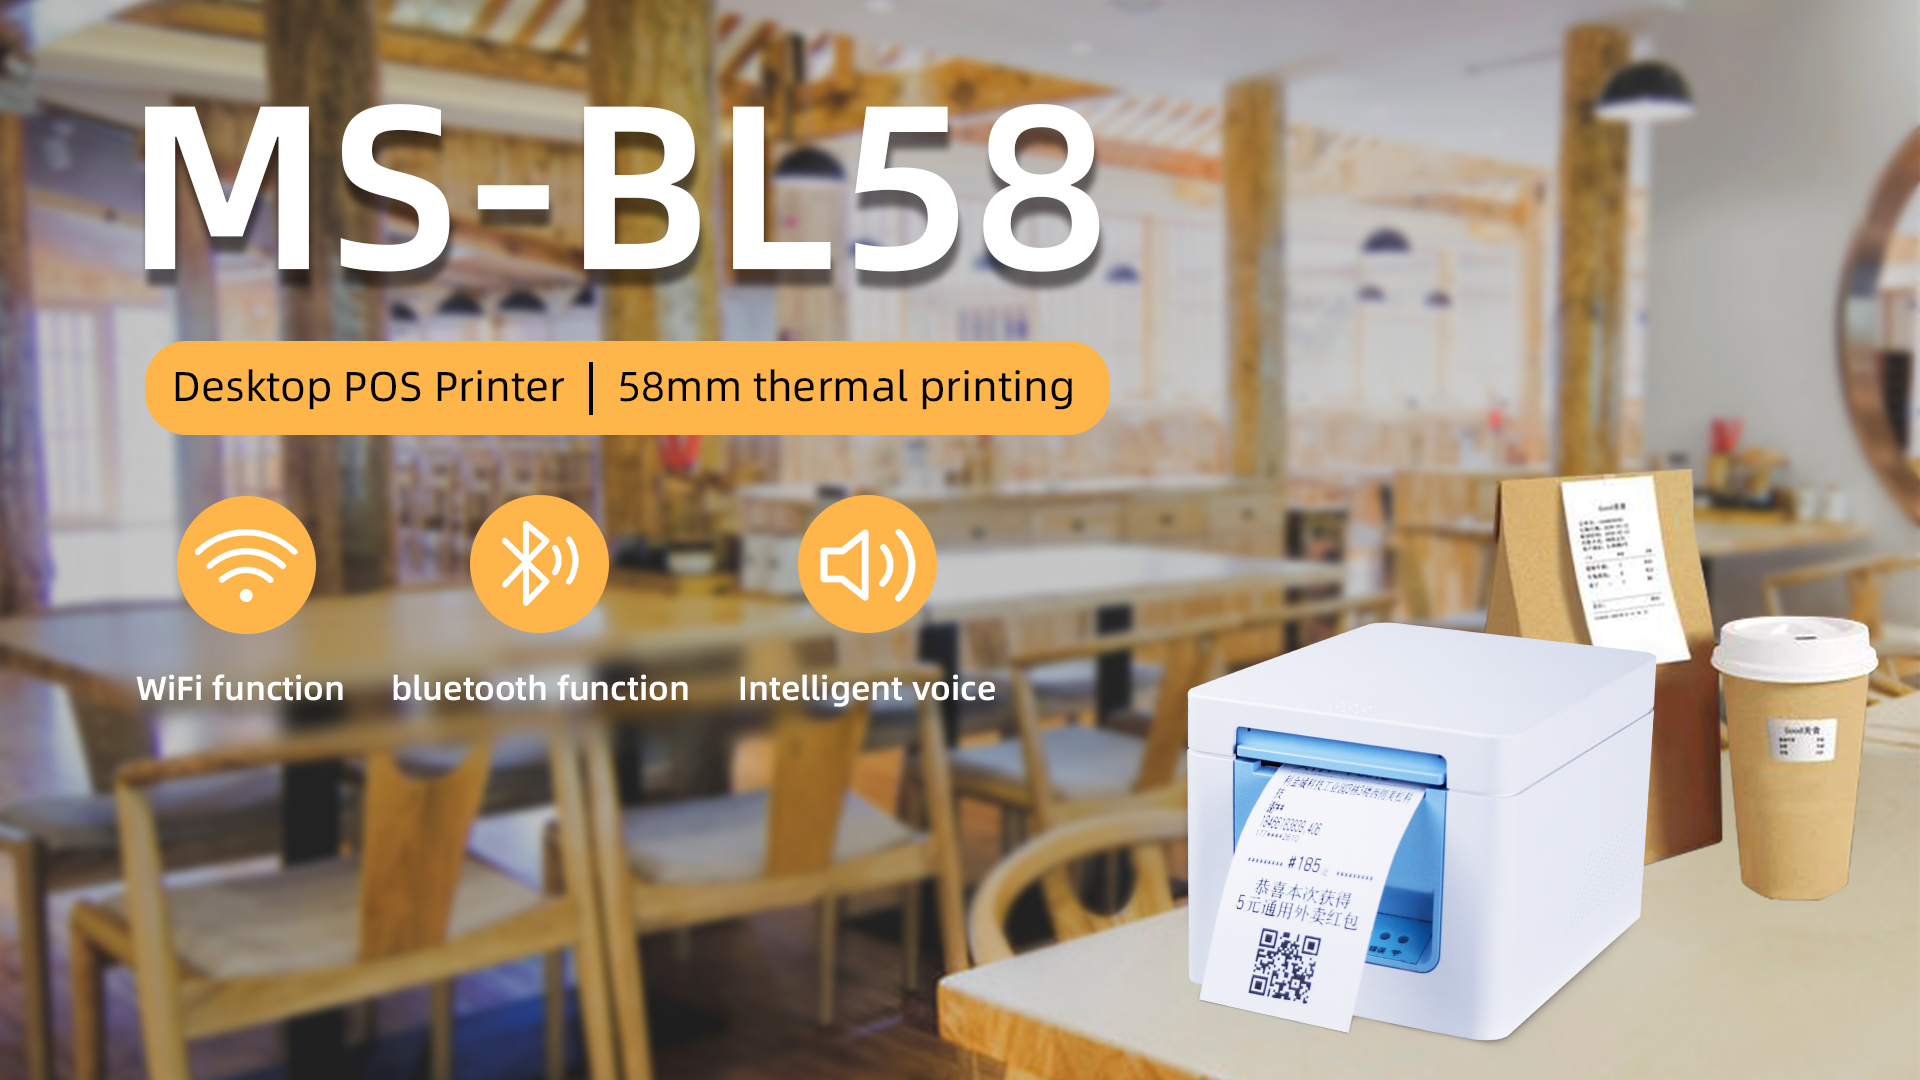   Masung Printer MS-BL58 Helps Retail Stores to Print Efficiently